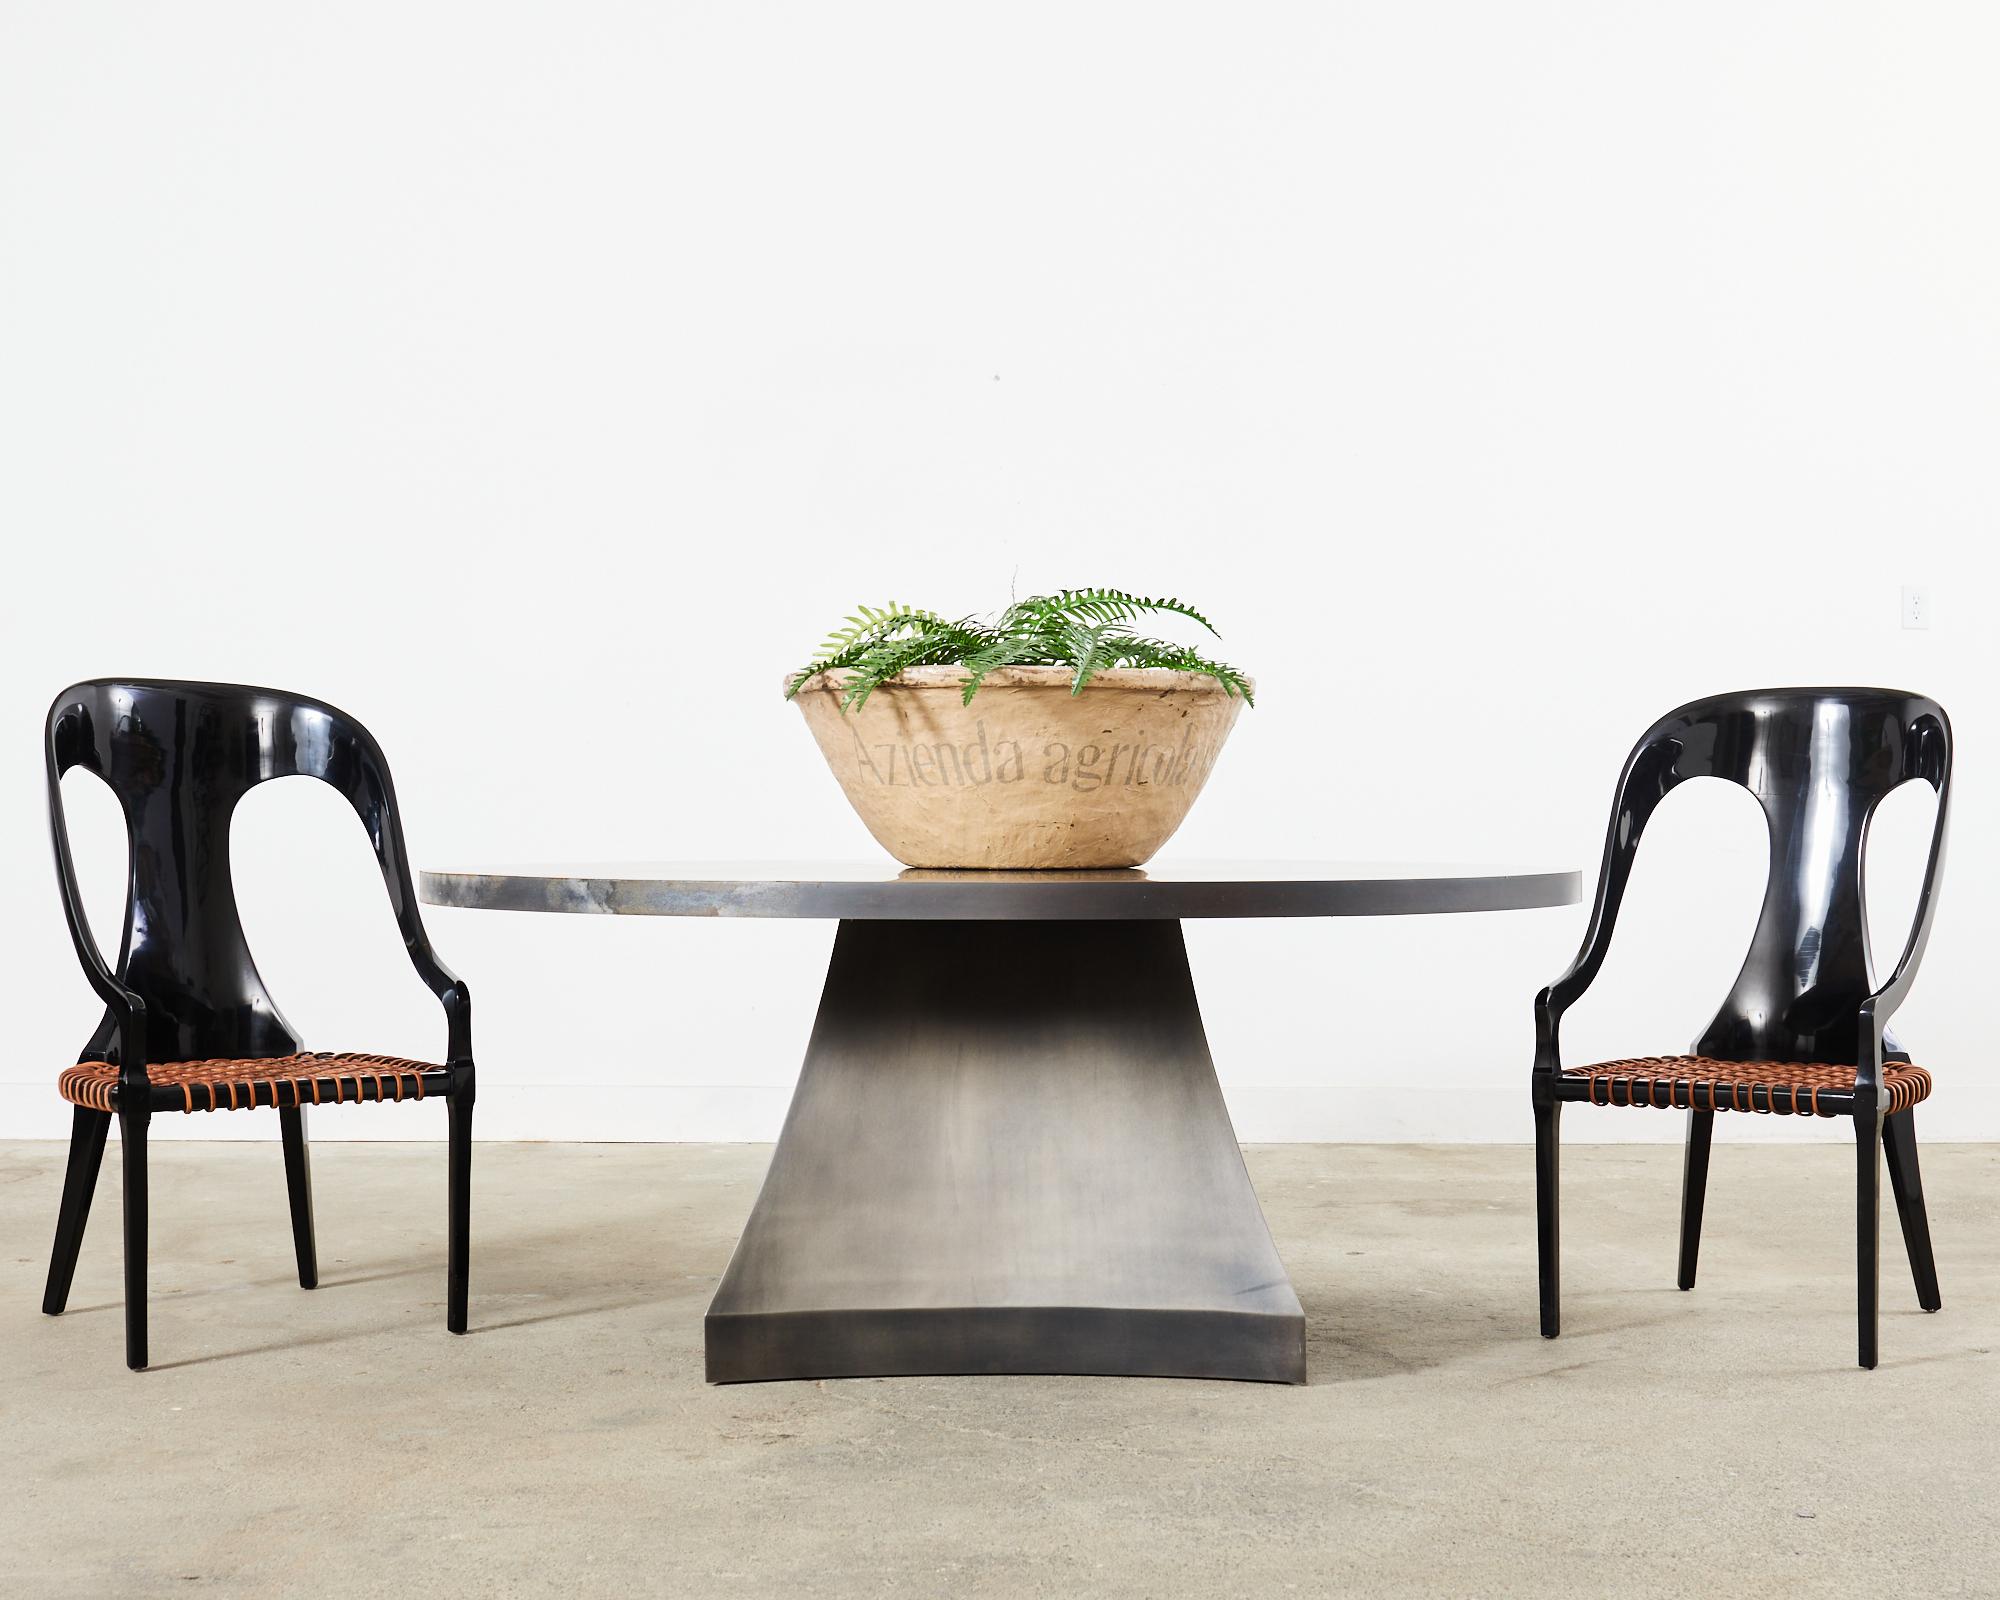 Imposing minimalist round iron dining table or grand center table designed by Sally Sirkin Lewis for J. Robert Scott. The modern bespoke table measures 75 inches in diameter supported by a sculptural four sided base. The pedestal has gracefully